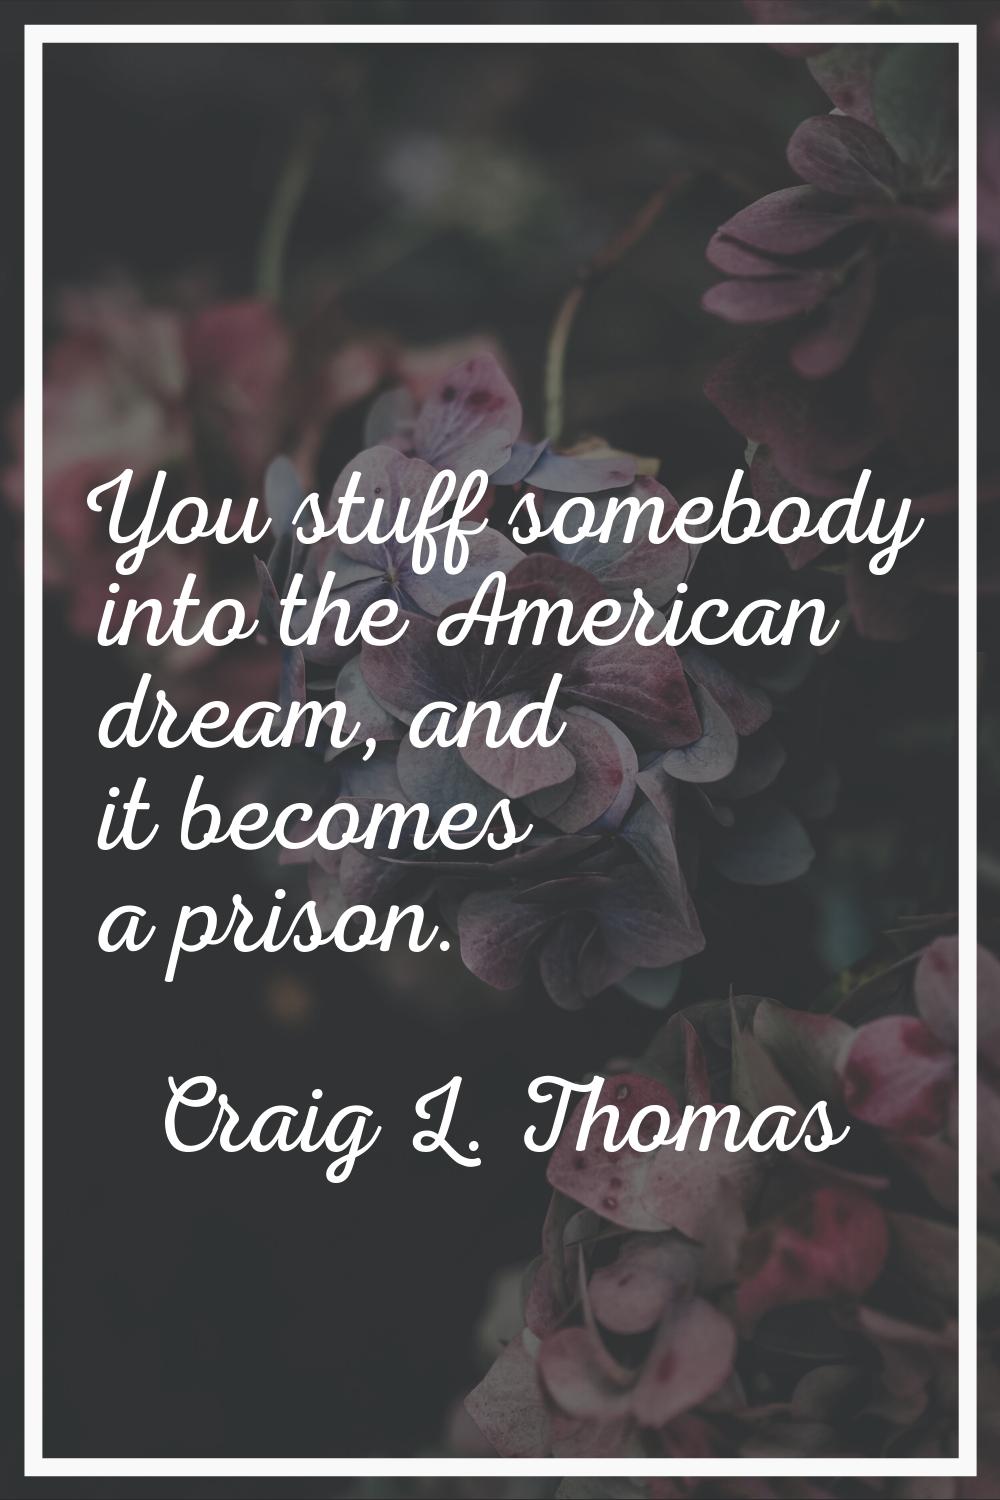 You stuff somebody into the American dream, and it becomes a prison.